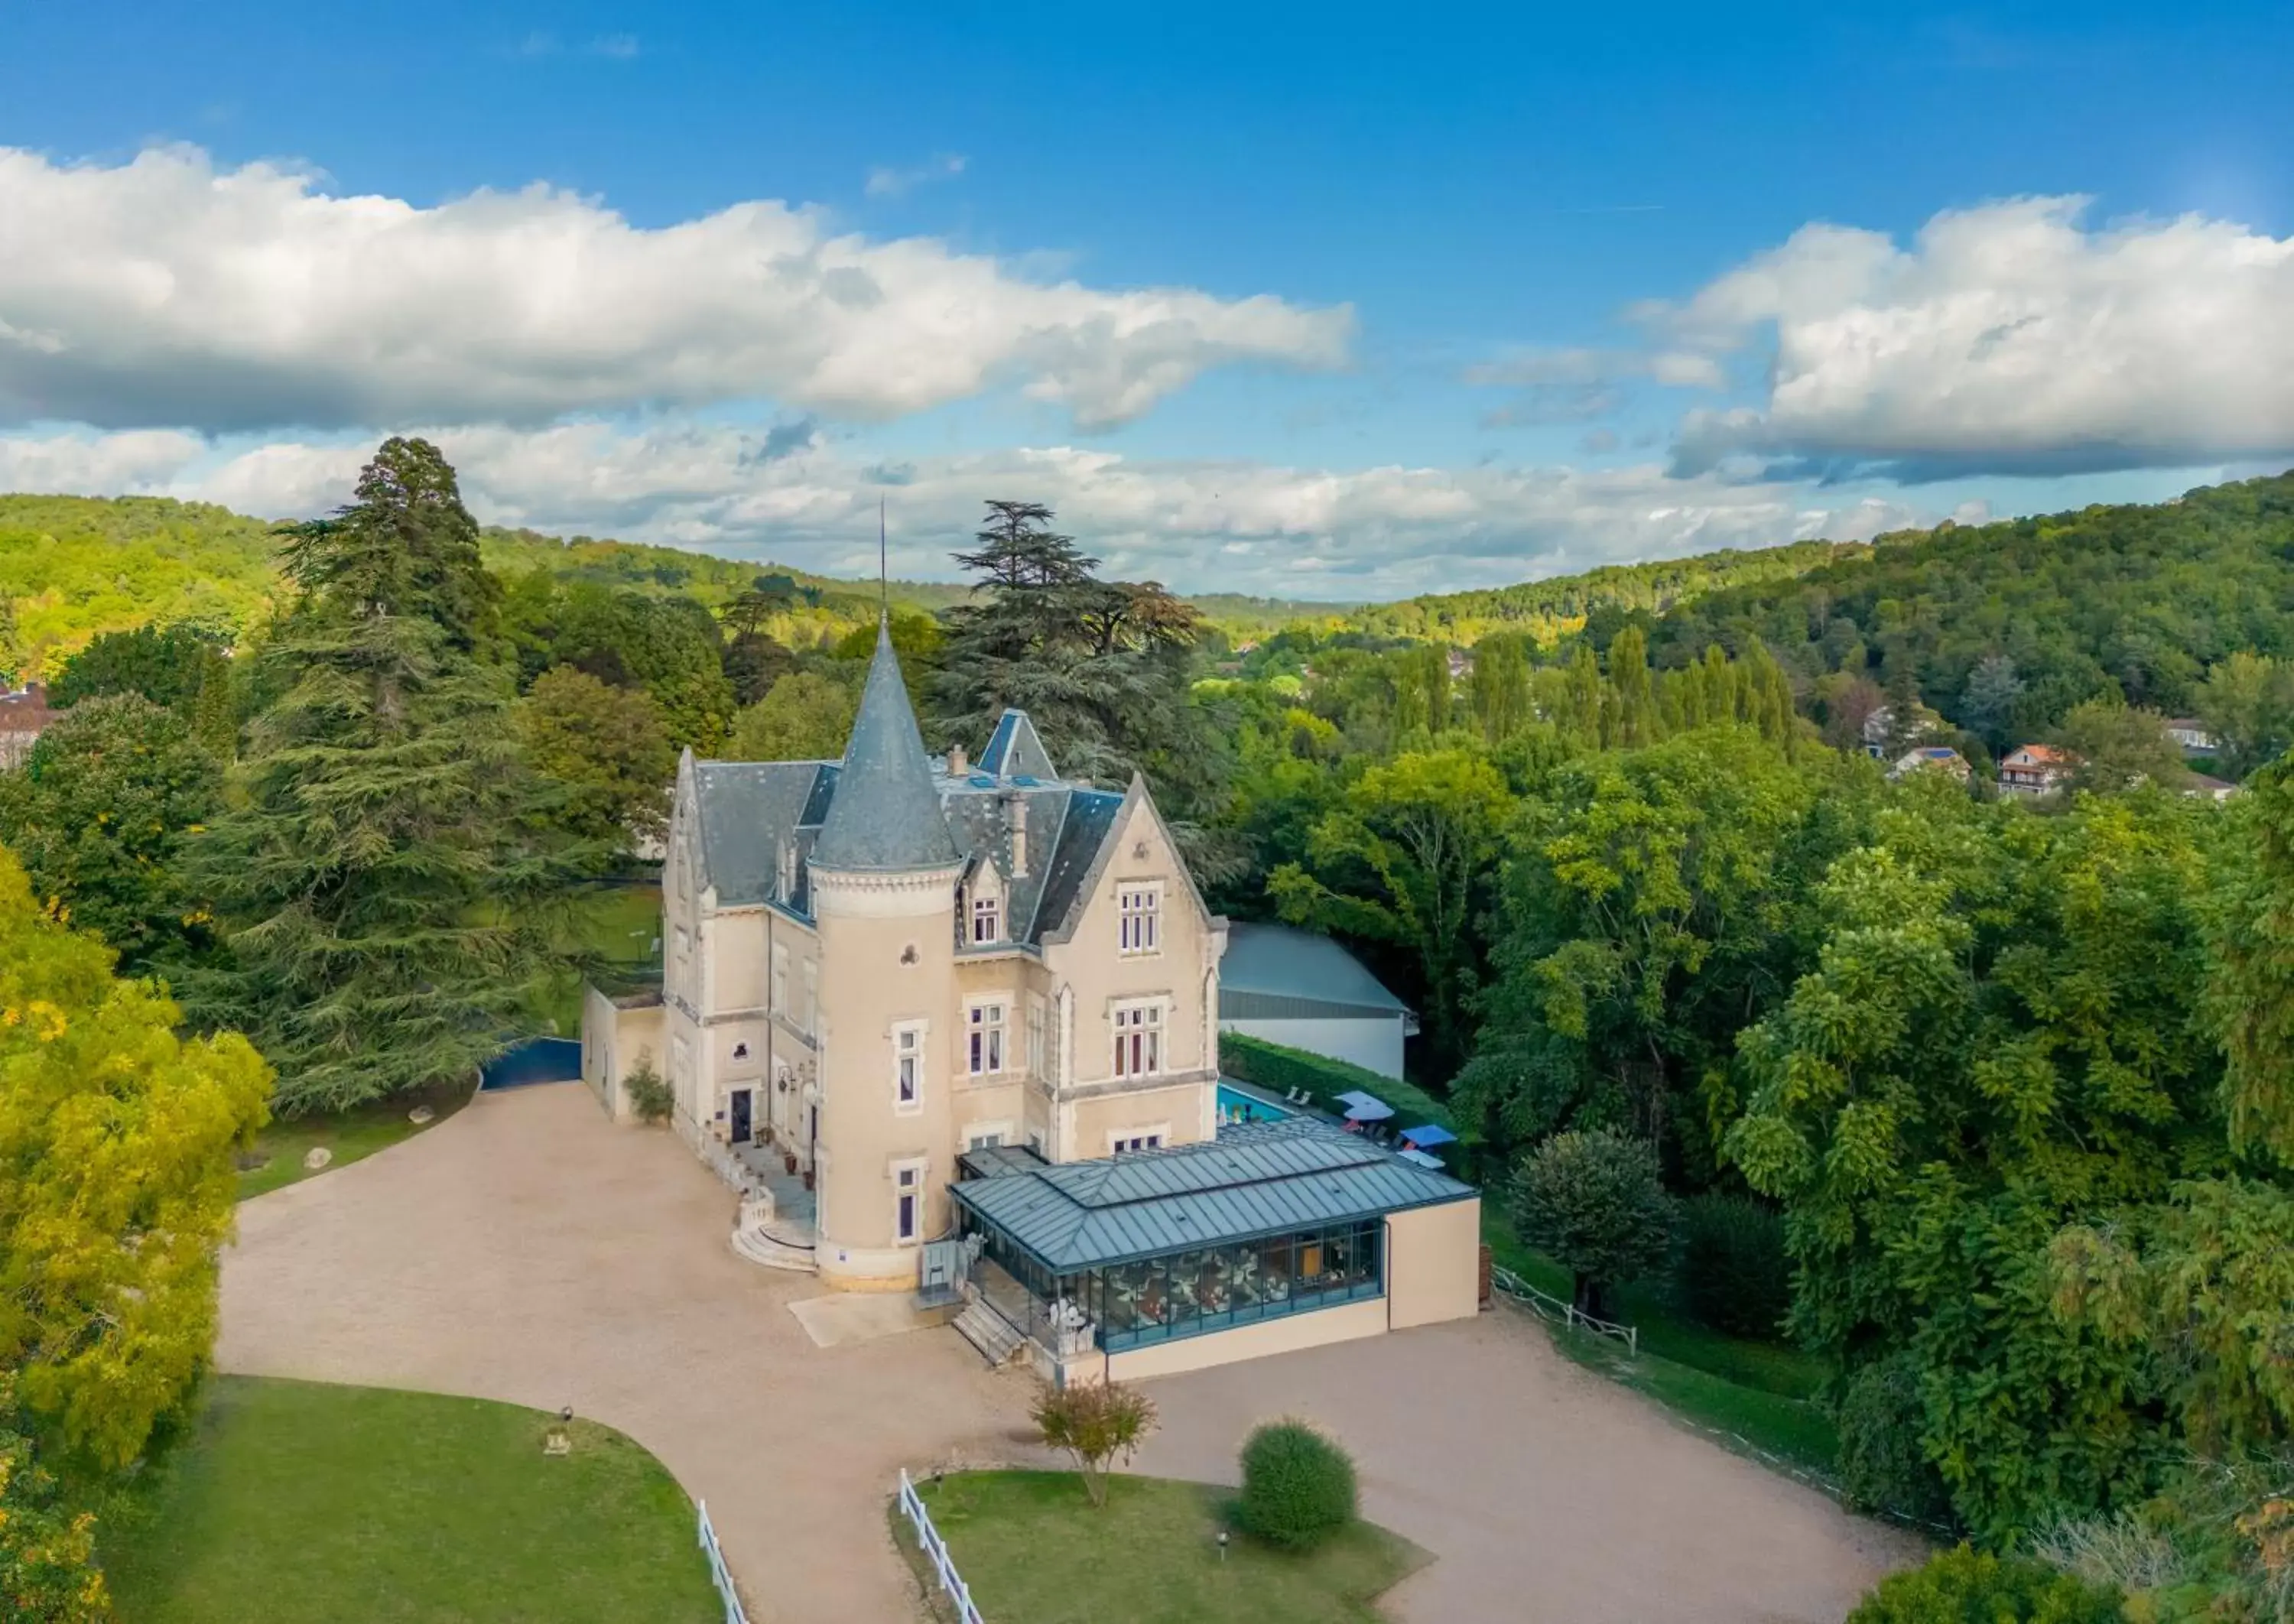 Property building, Bird's-eye View in Château des Reynats